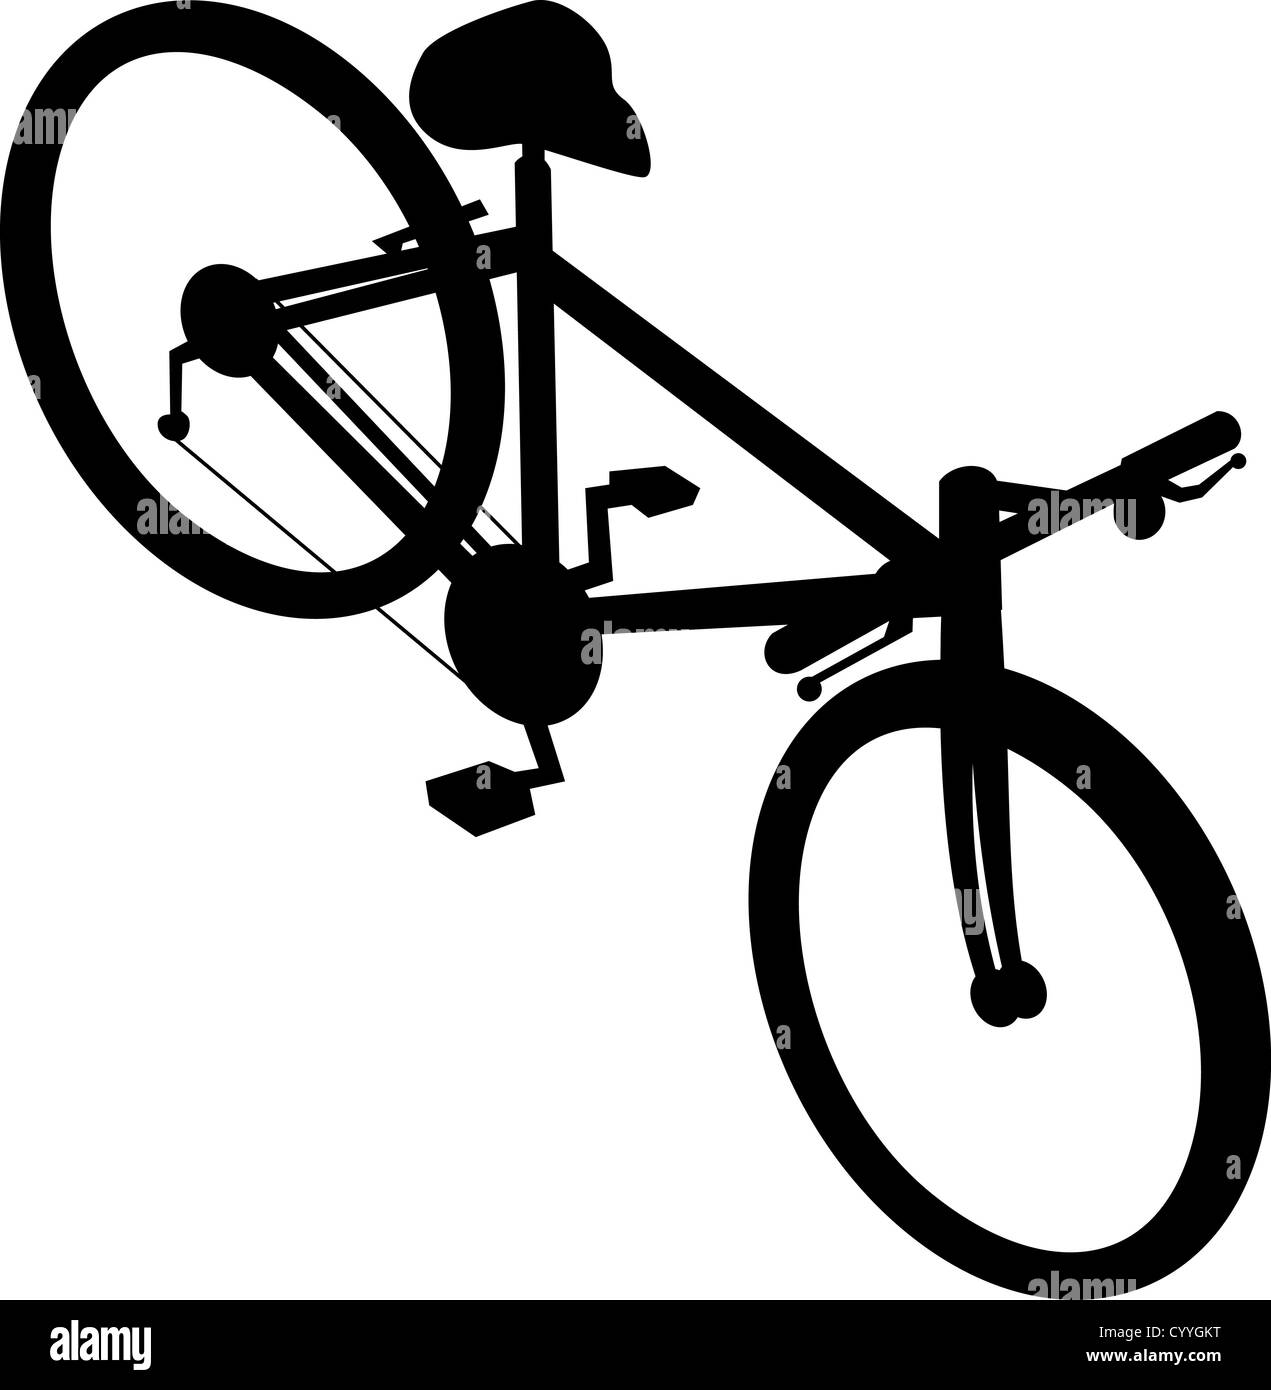 Illustration of a racing bicycle bike viewed from high angle done in retro style on isolated white background. Stock Photo